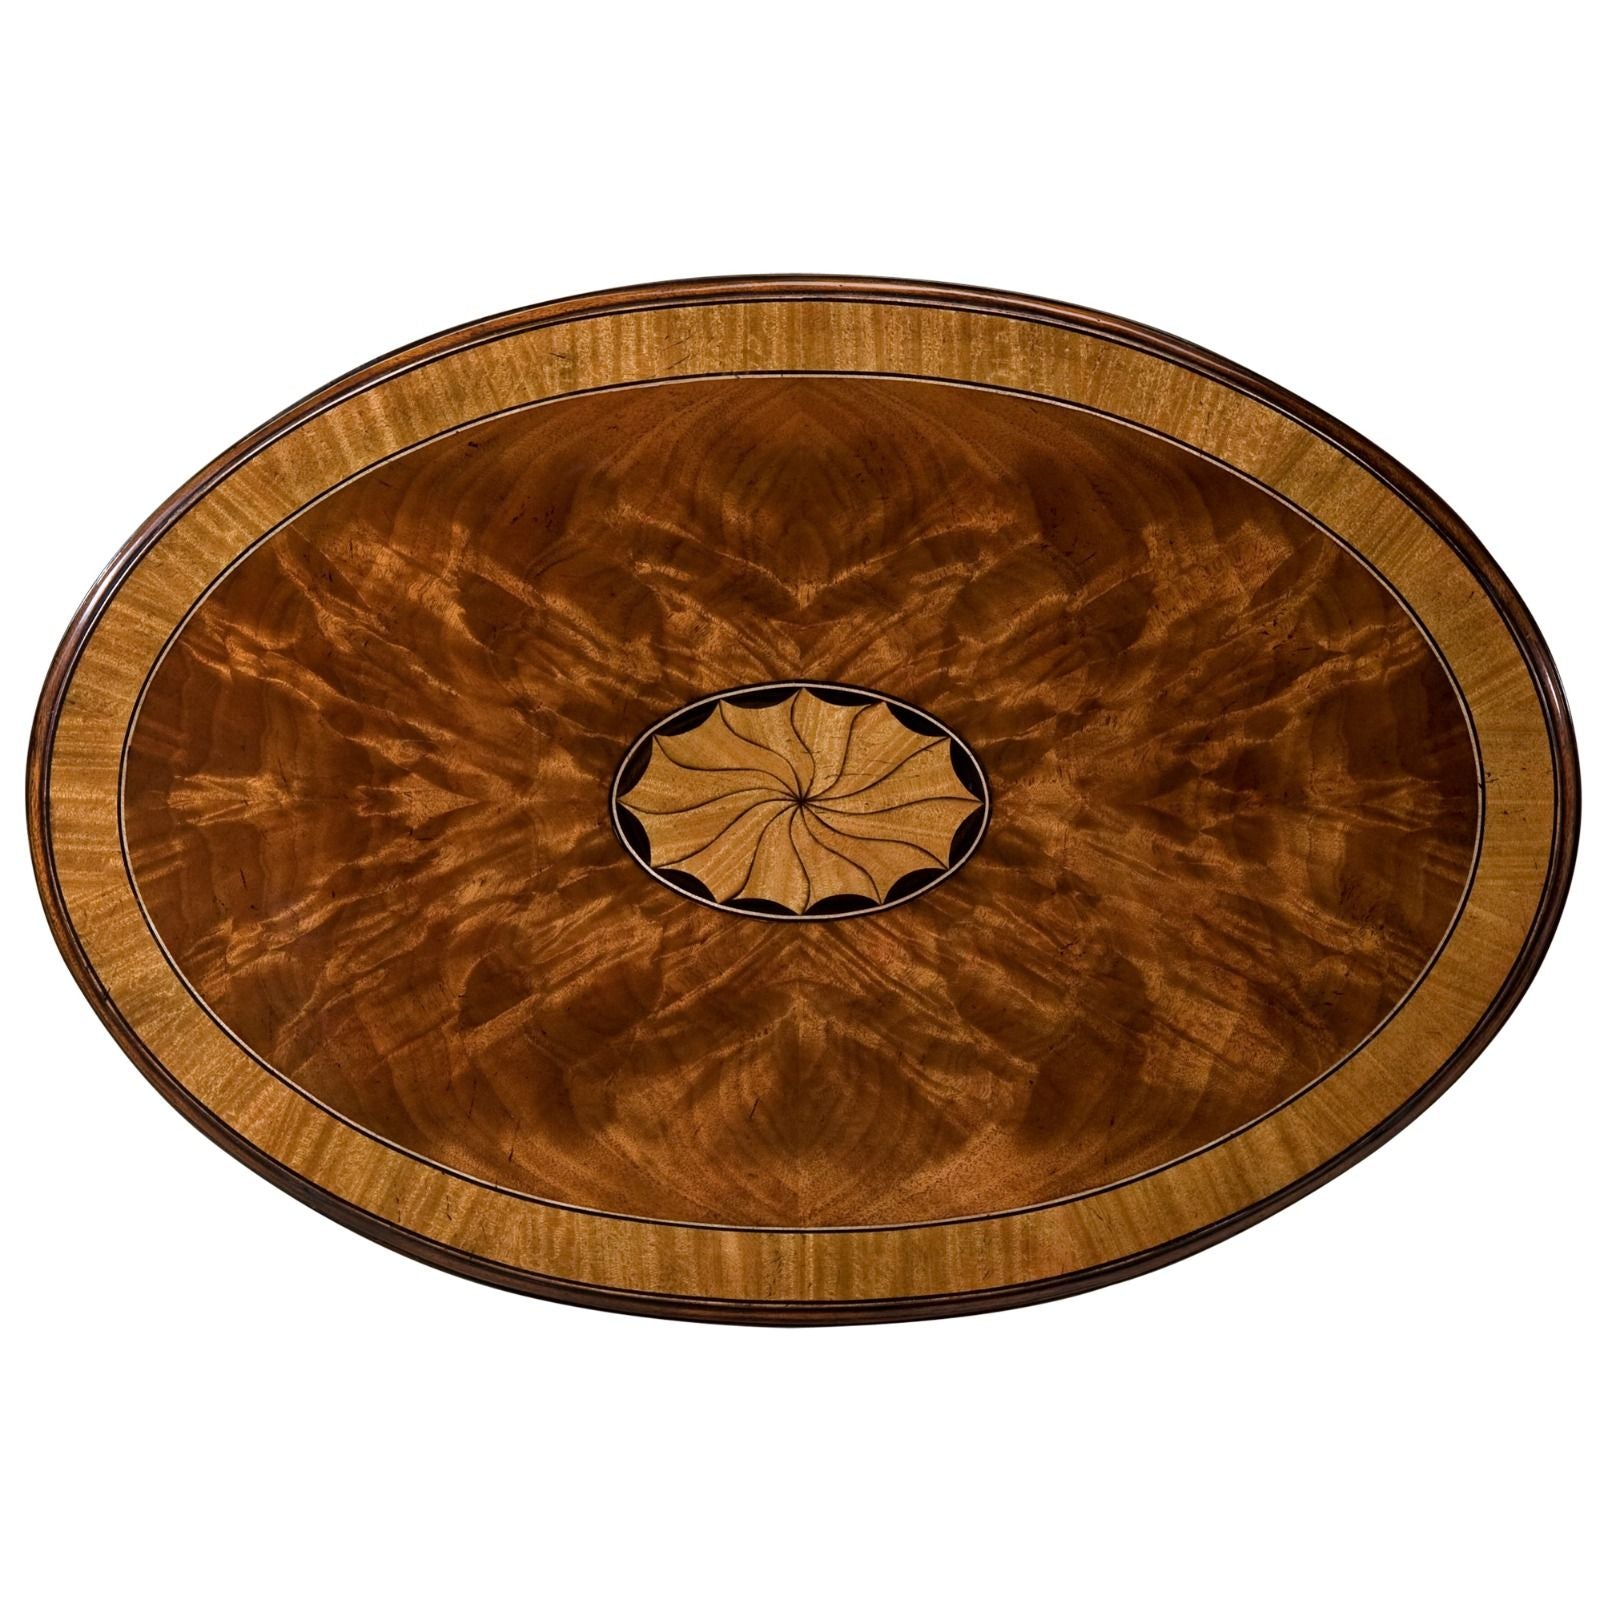 Oval flame mahogany accent table